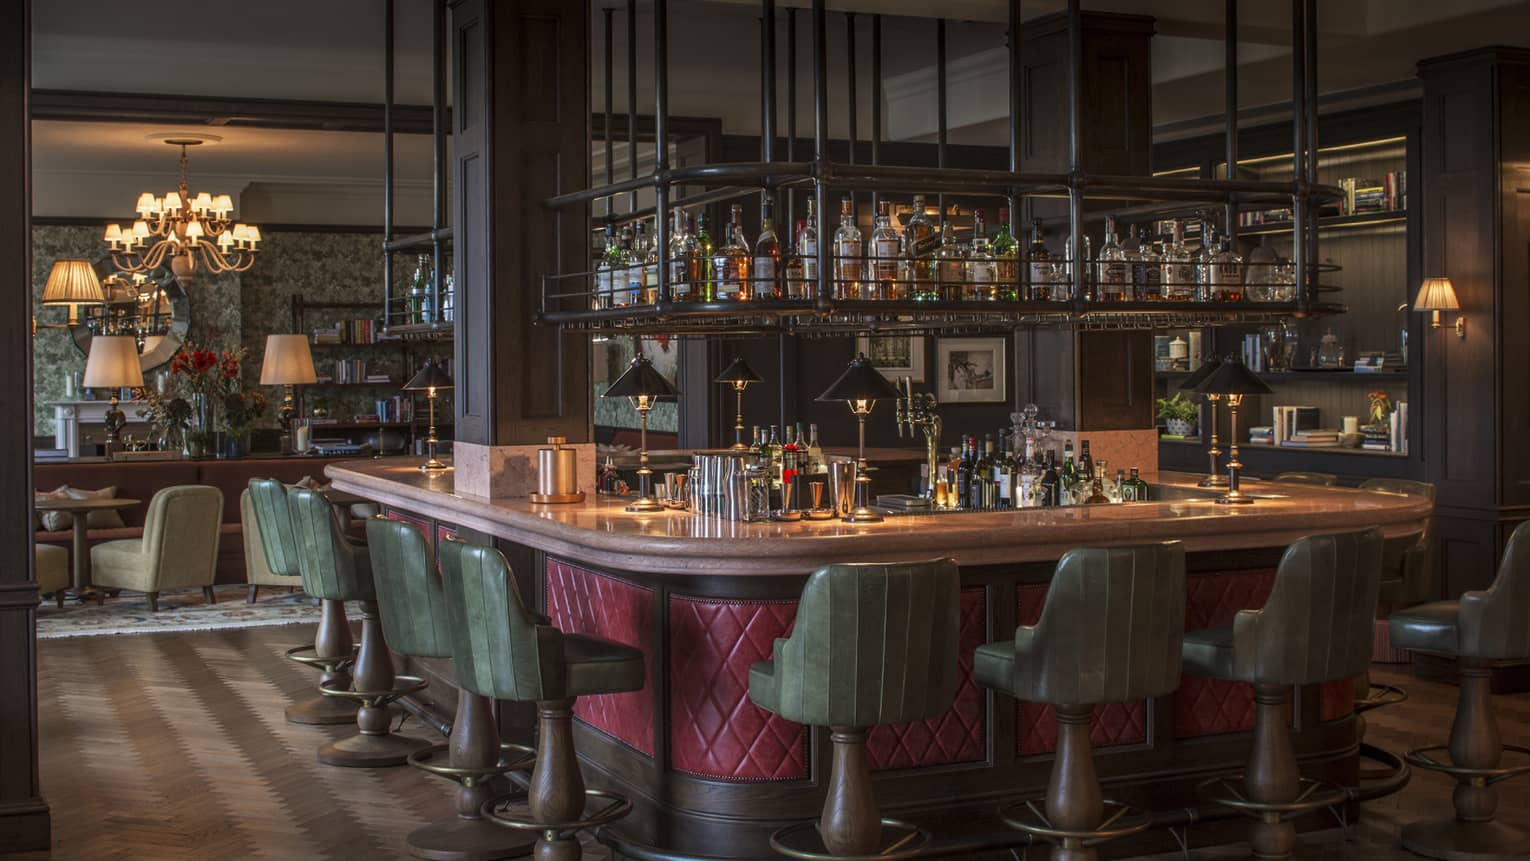 The Bar at Wild Carrot with red-wrapped and wood-accented bar, green barstools, and suspended spirits